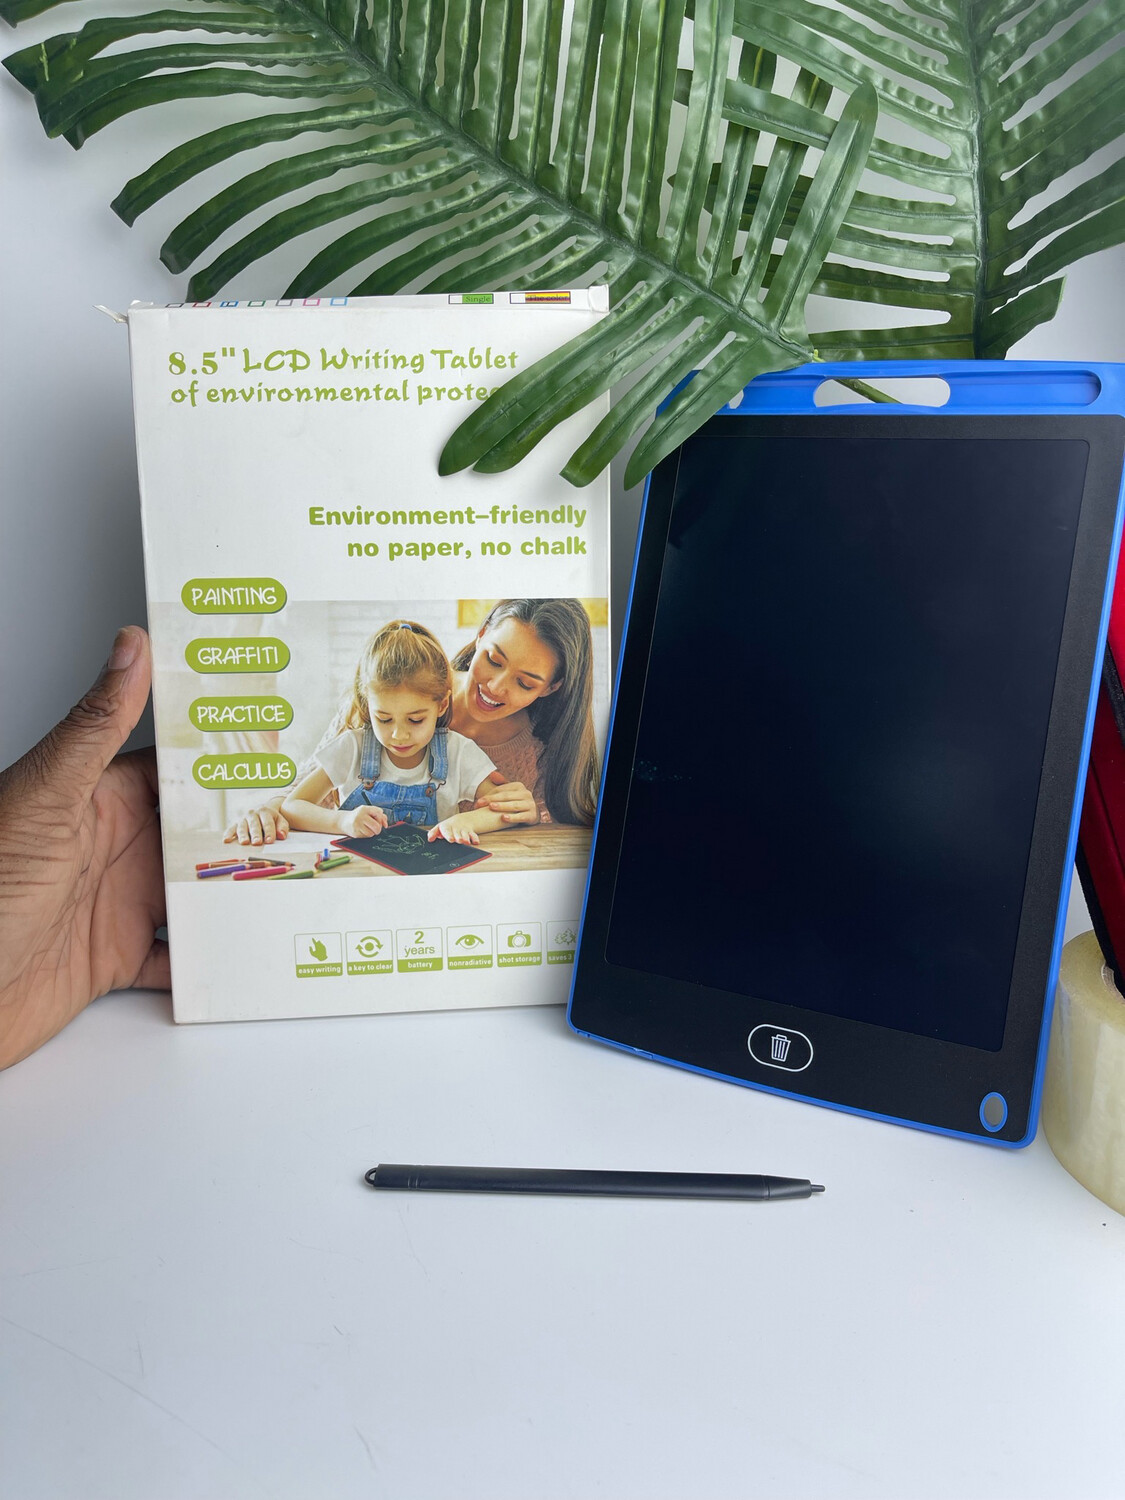 LCD Writing Tablet (comes With A Pen